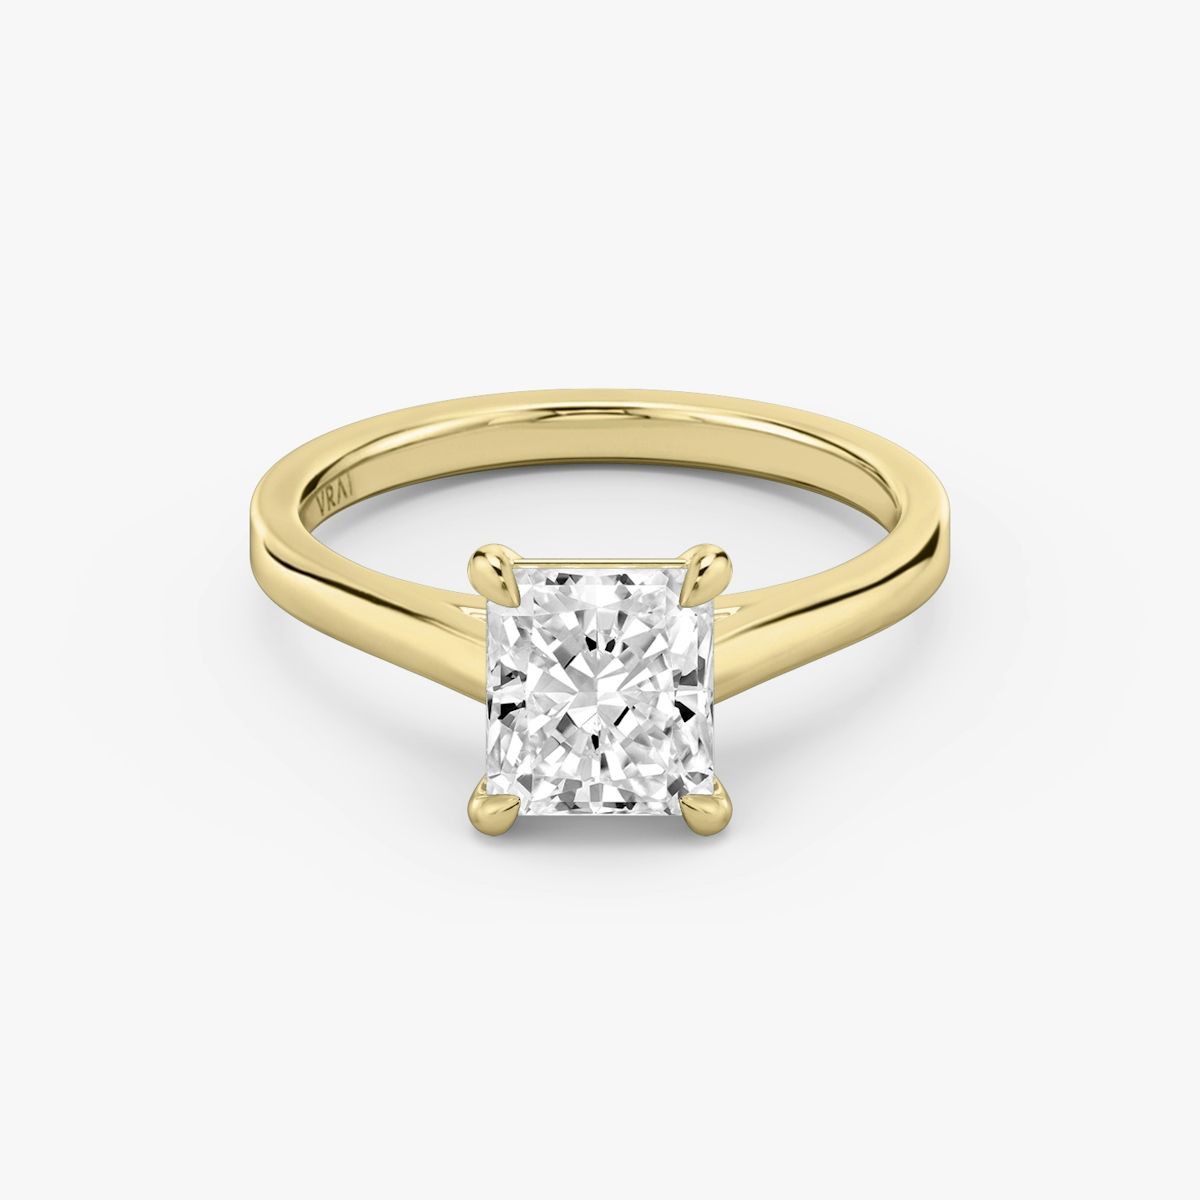 1/2cttw Round Diamond Solitaire Engagement Ring with Channel Set Diamond Accents in 14K Yellow Gold